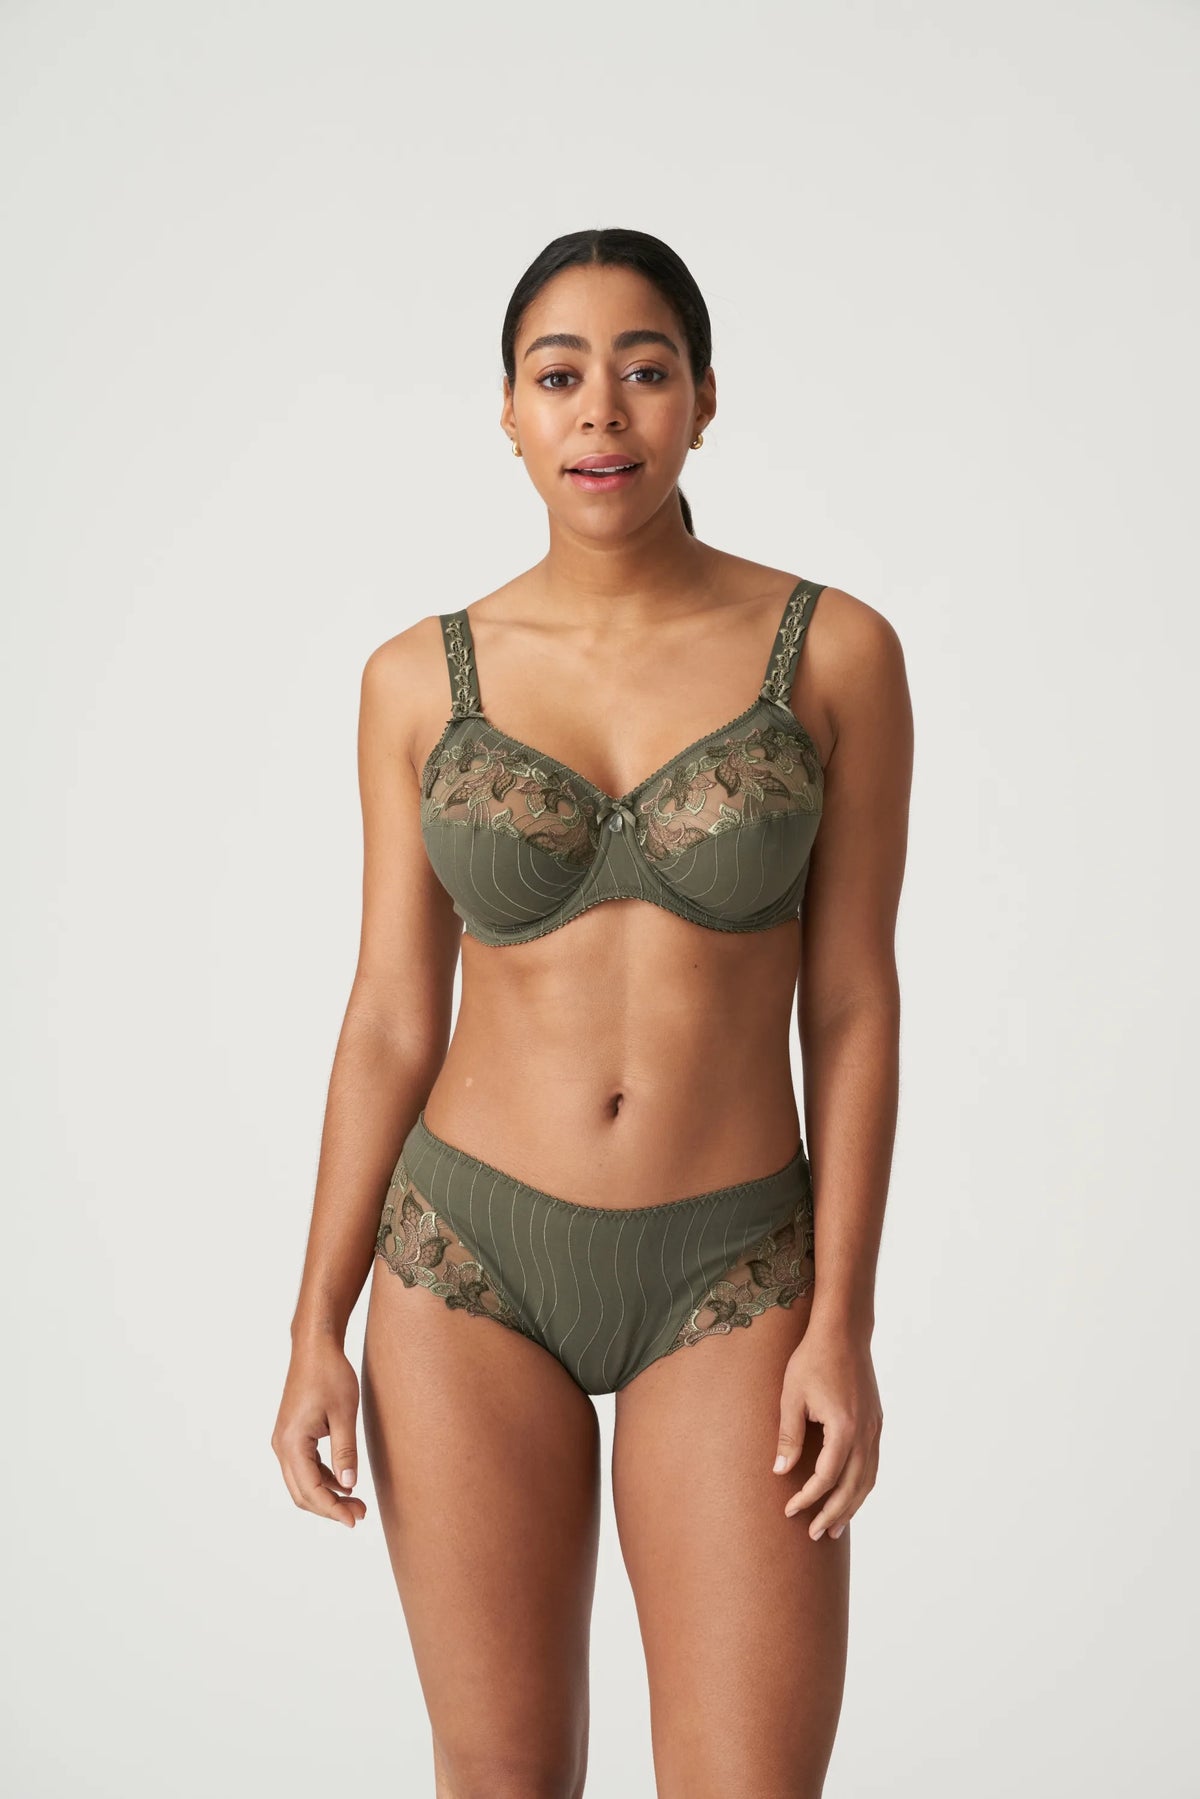 PRIMA DONNA DEAUVILLE FULL CUP COMFORT BRA - PARADISE GREEN